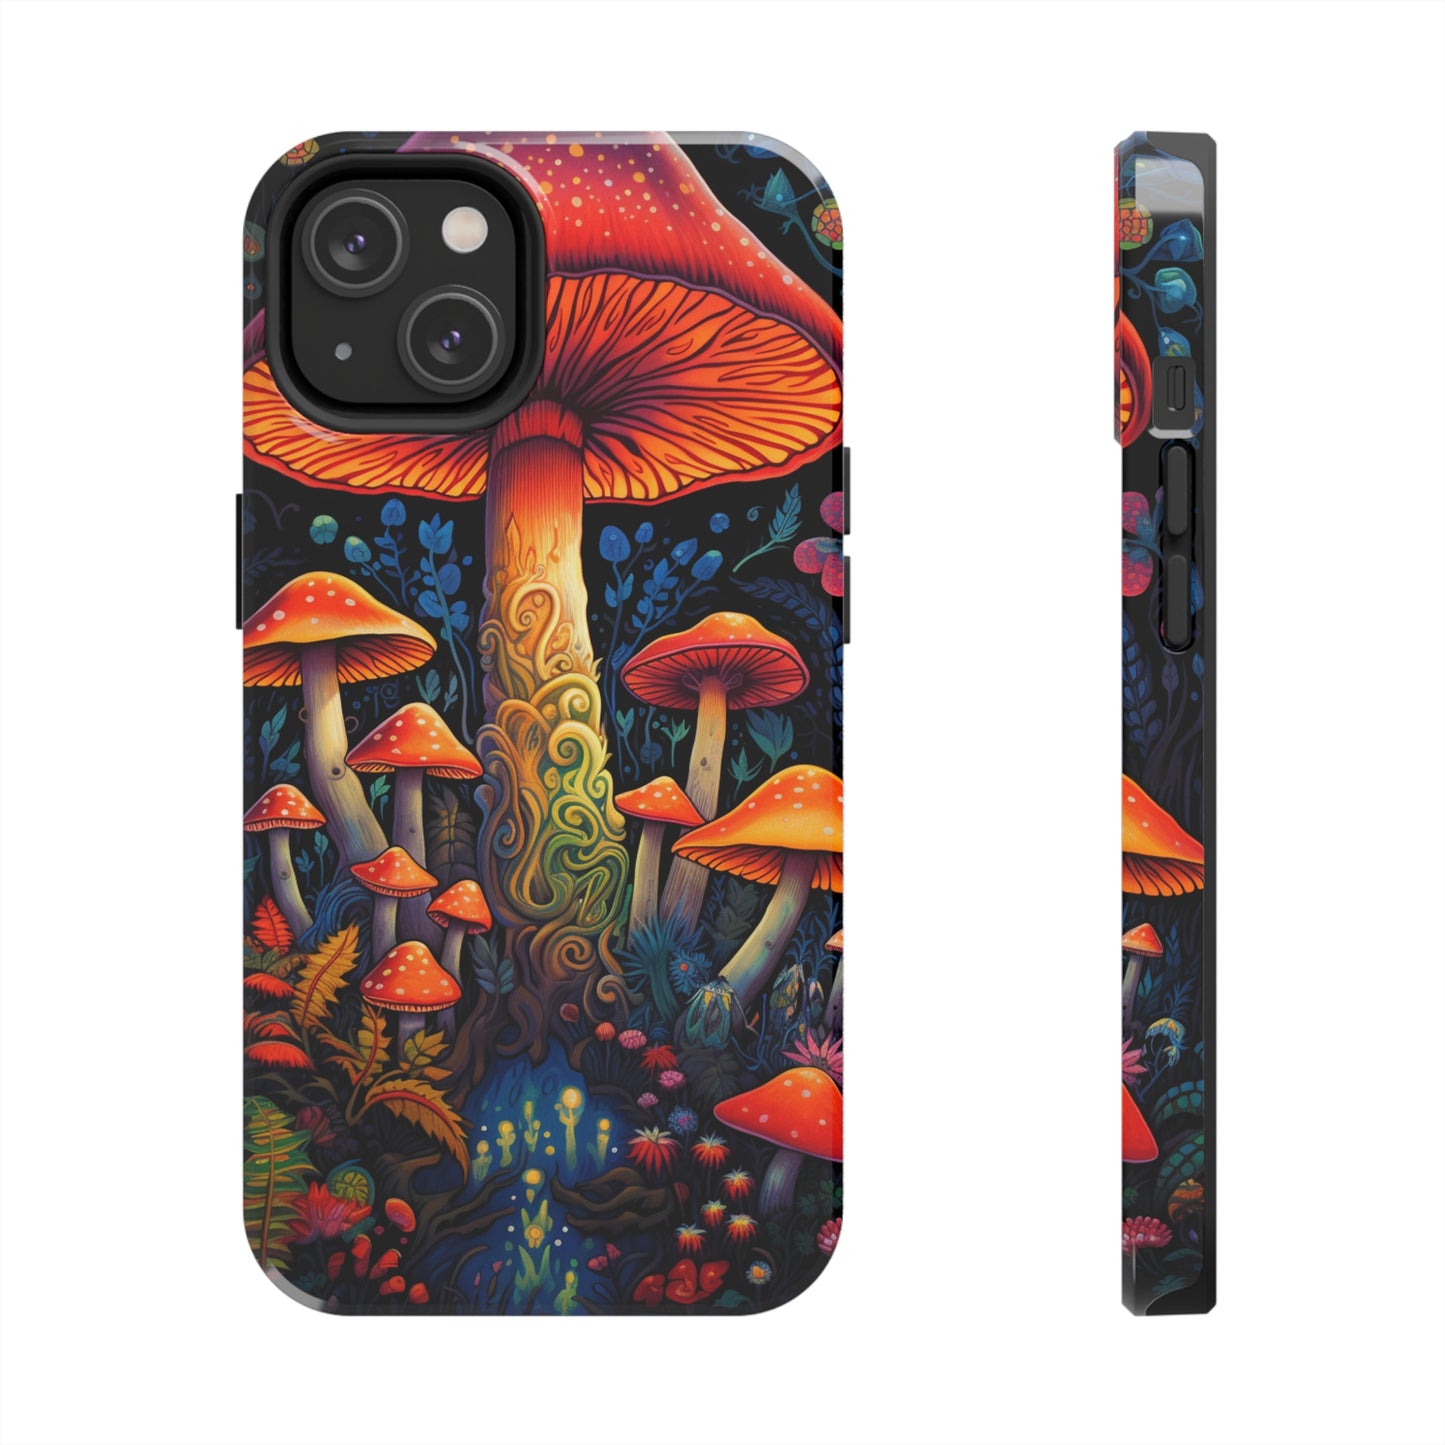 Psychedelic Art Phone Cover with Mushroom Design